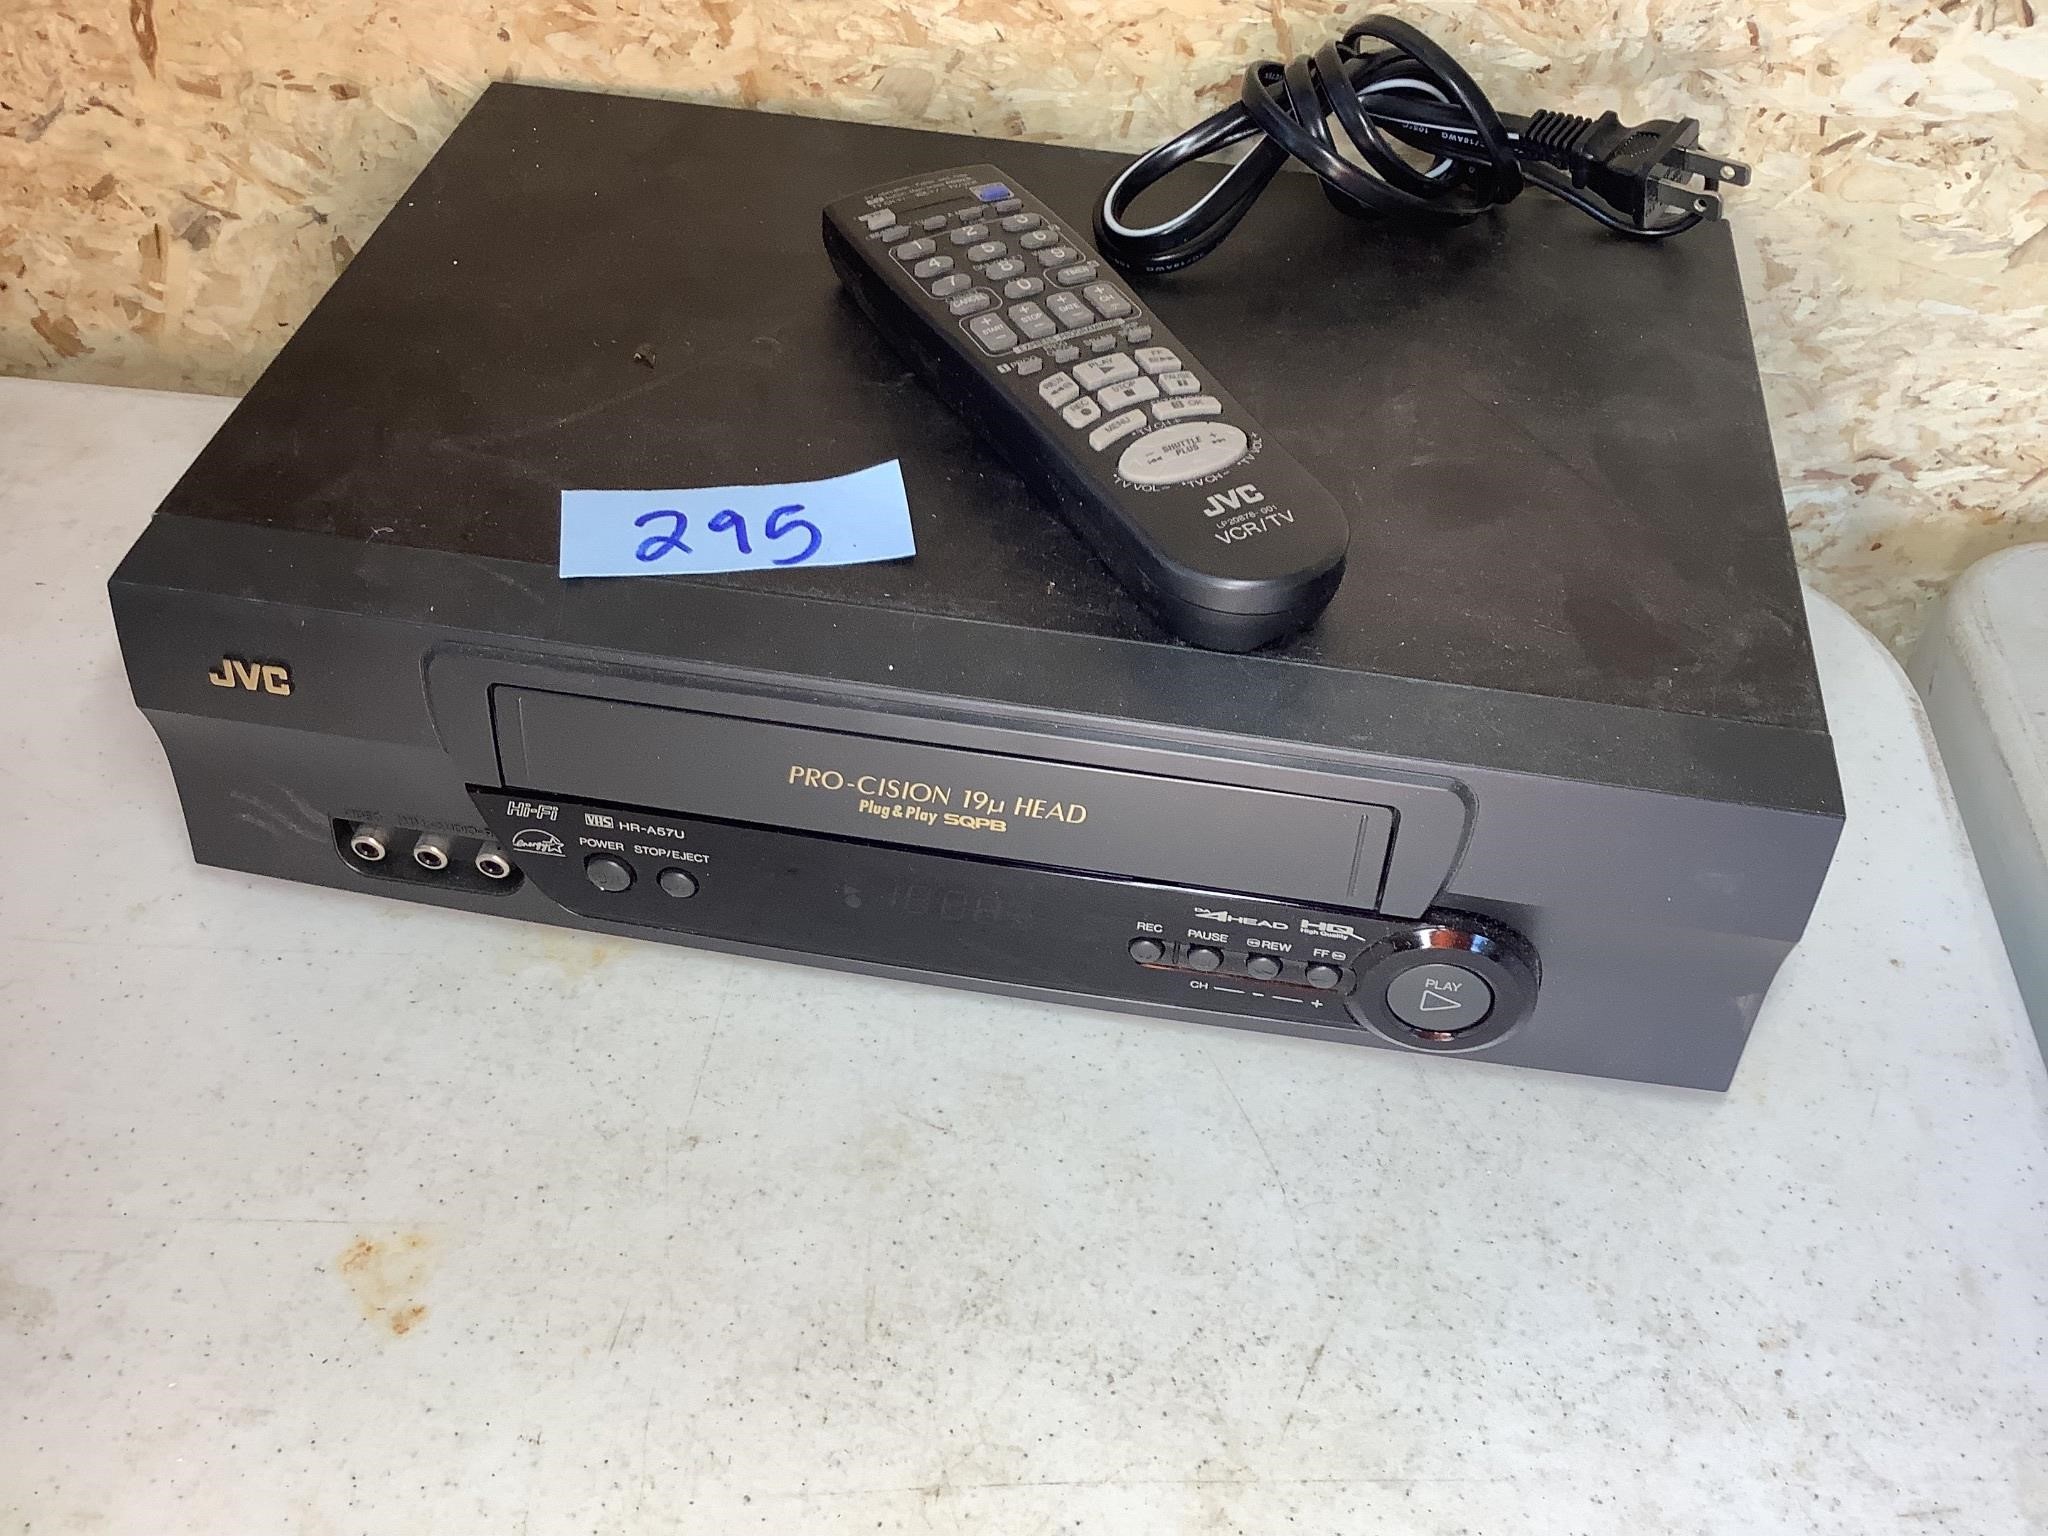 JVC VHS PLAYER with remote never used